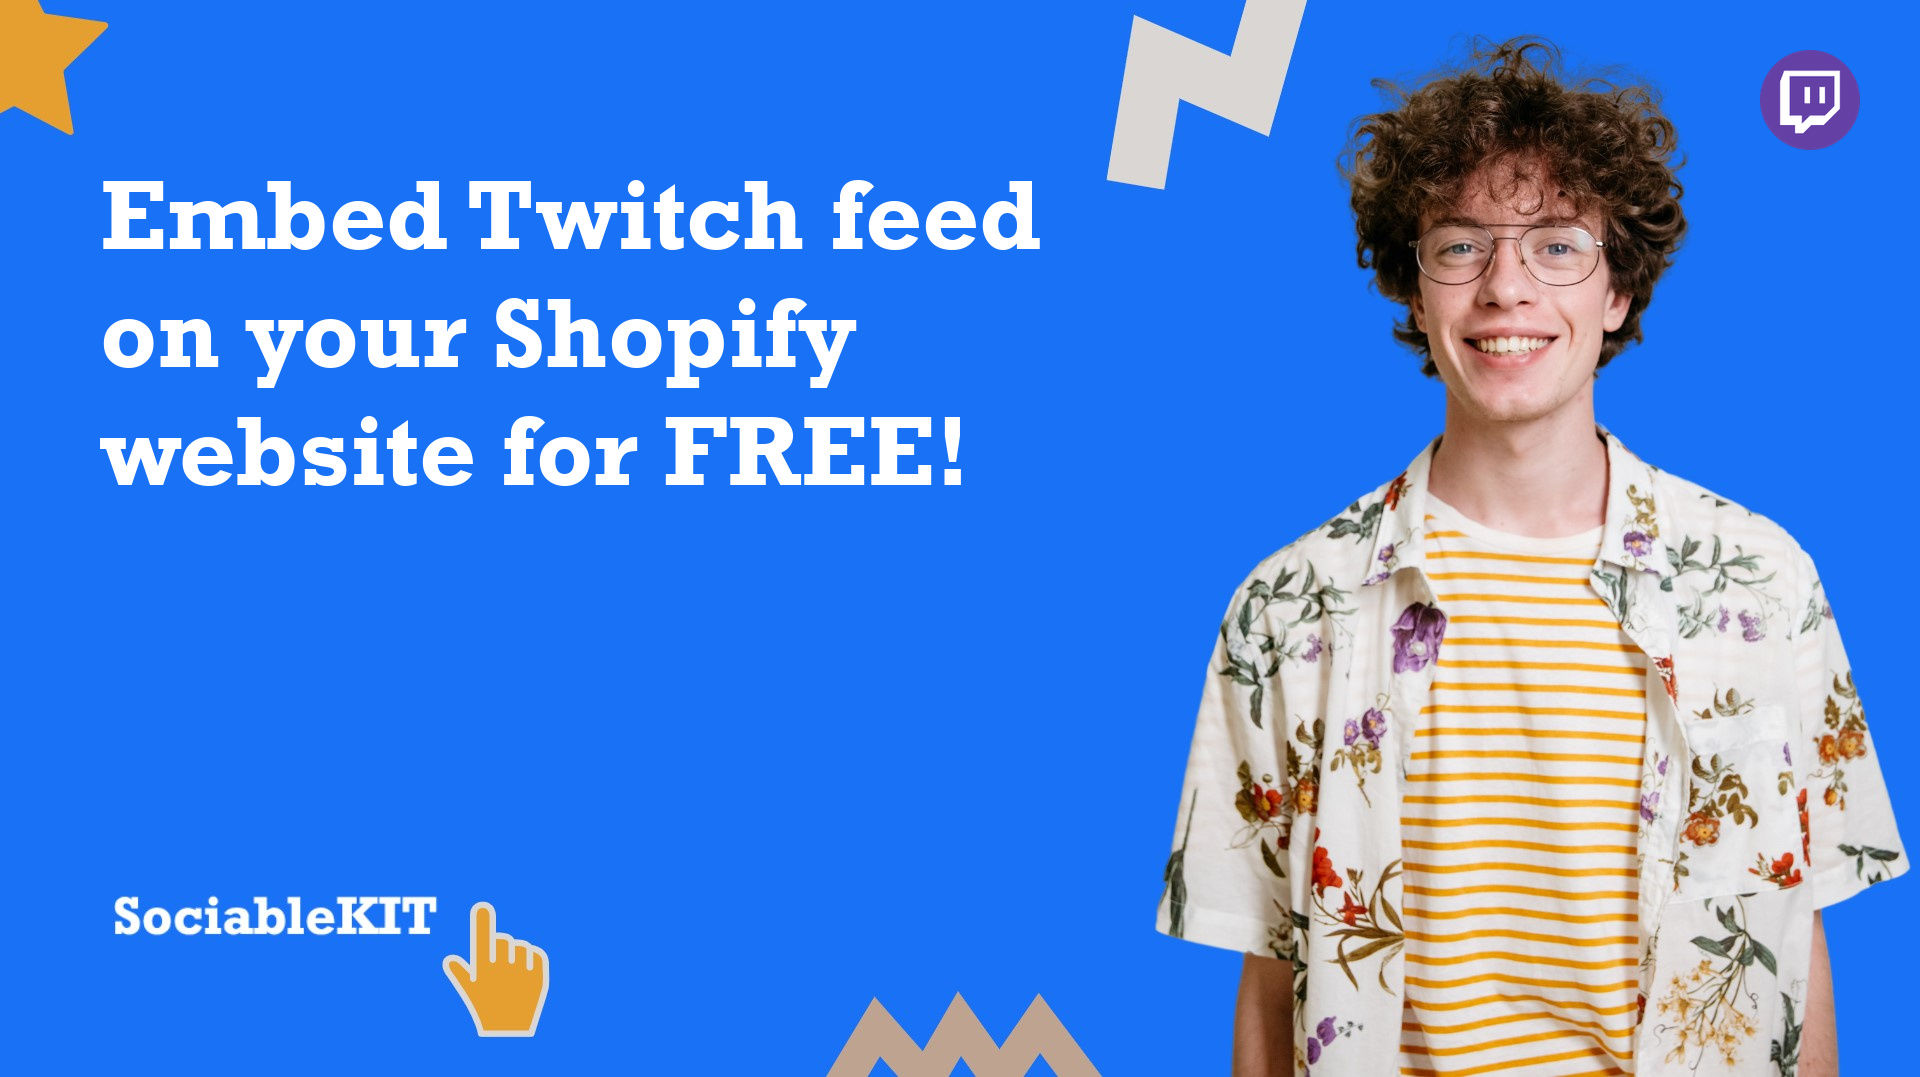 How to embed Twitch feed on your Shopify website for FREE?